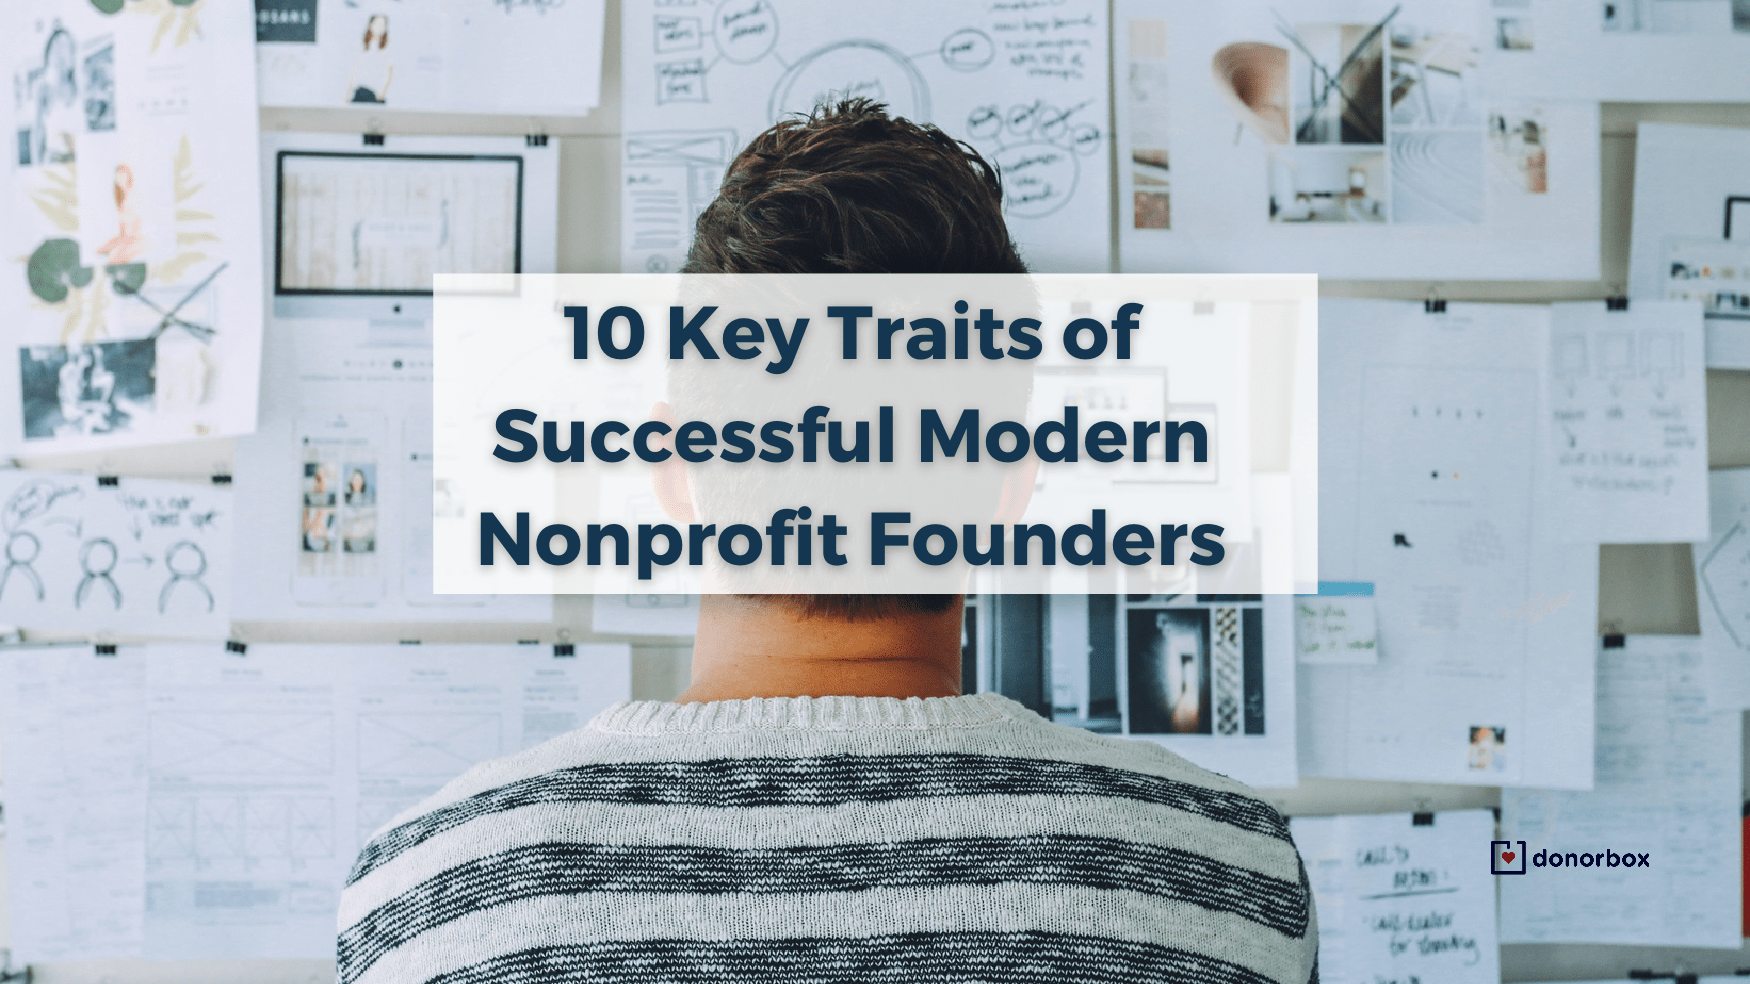 10 Key Traits of Successful Modern Nonprofit Founders